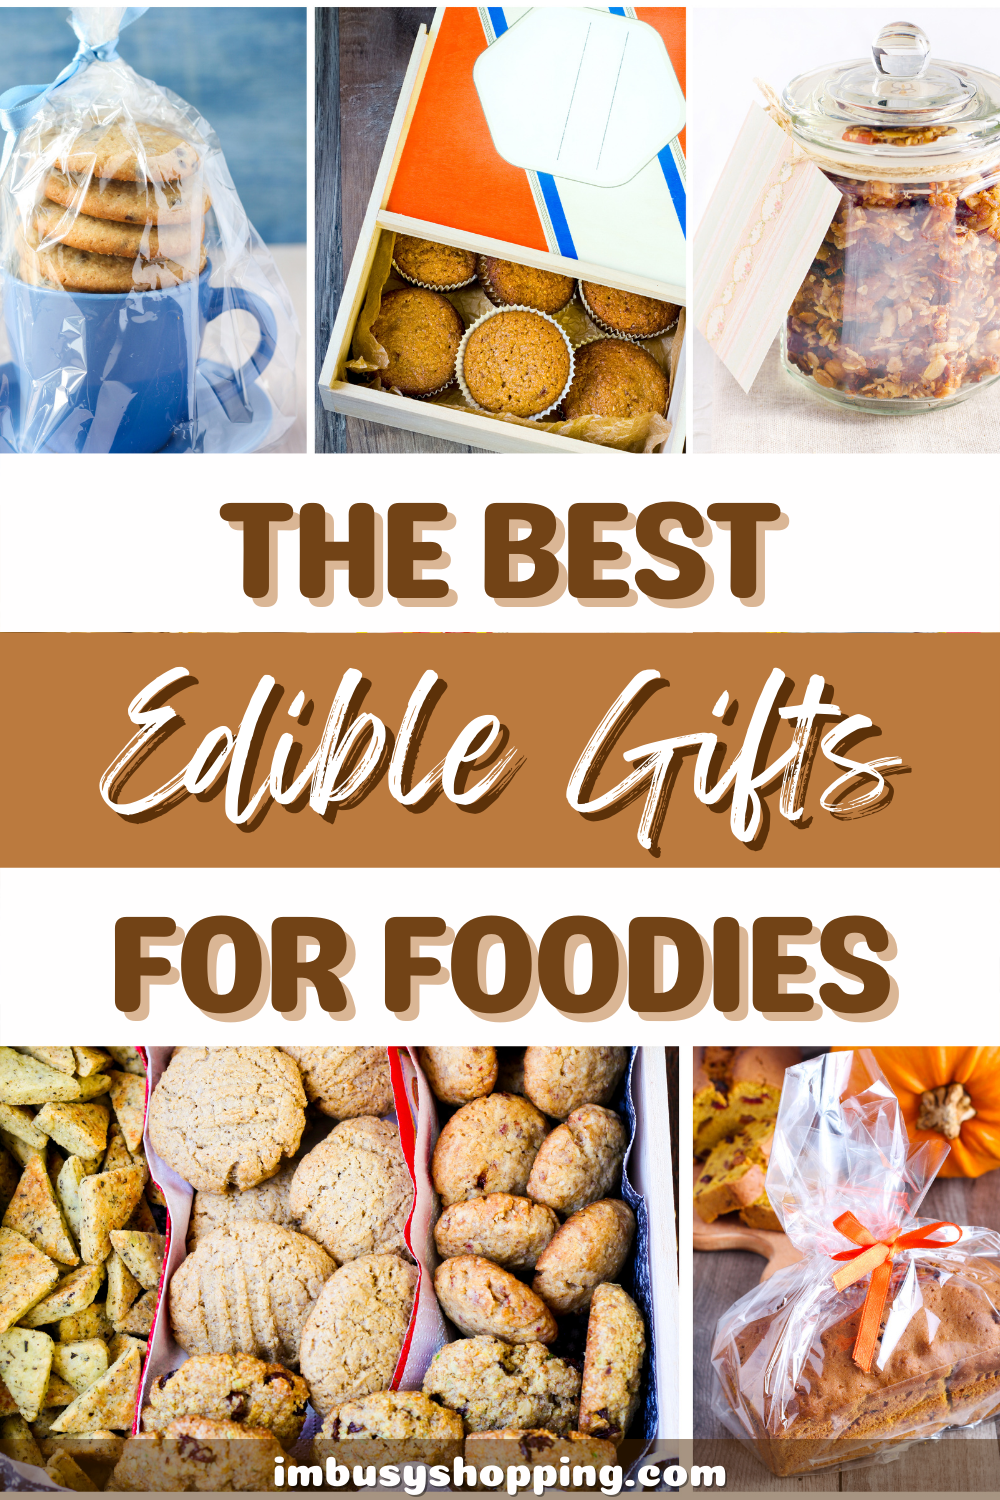 Pin showing the title The Best Edible Gifts for Foodies